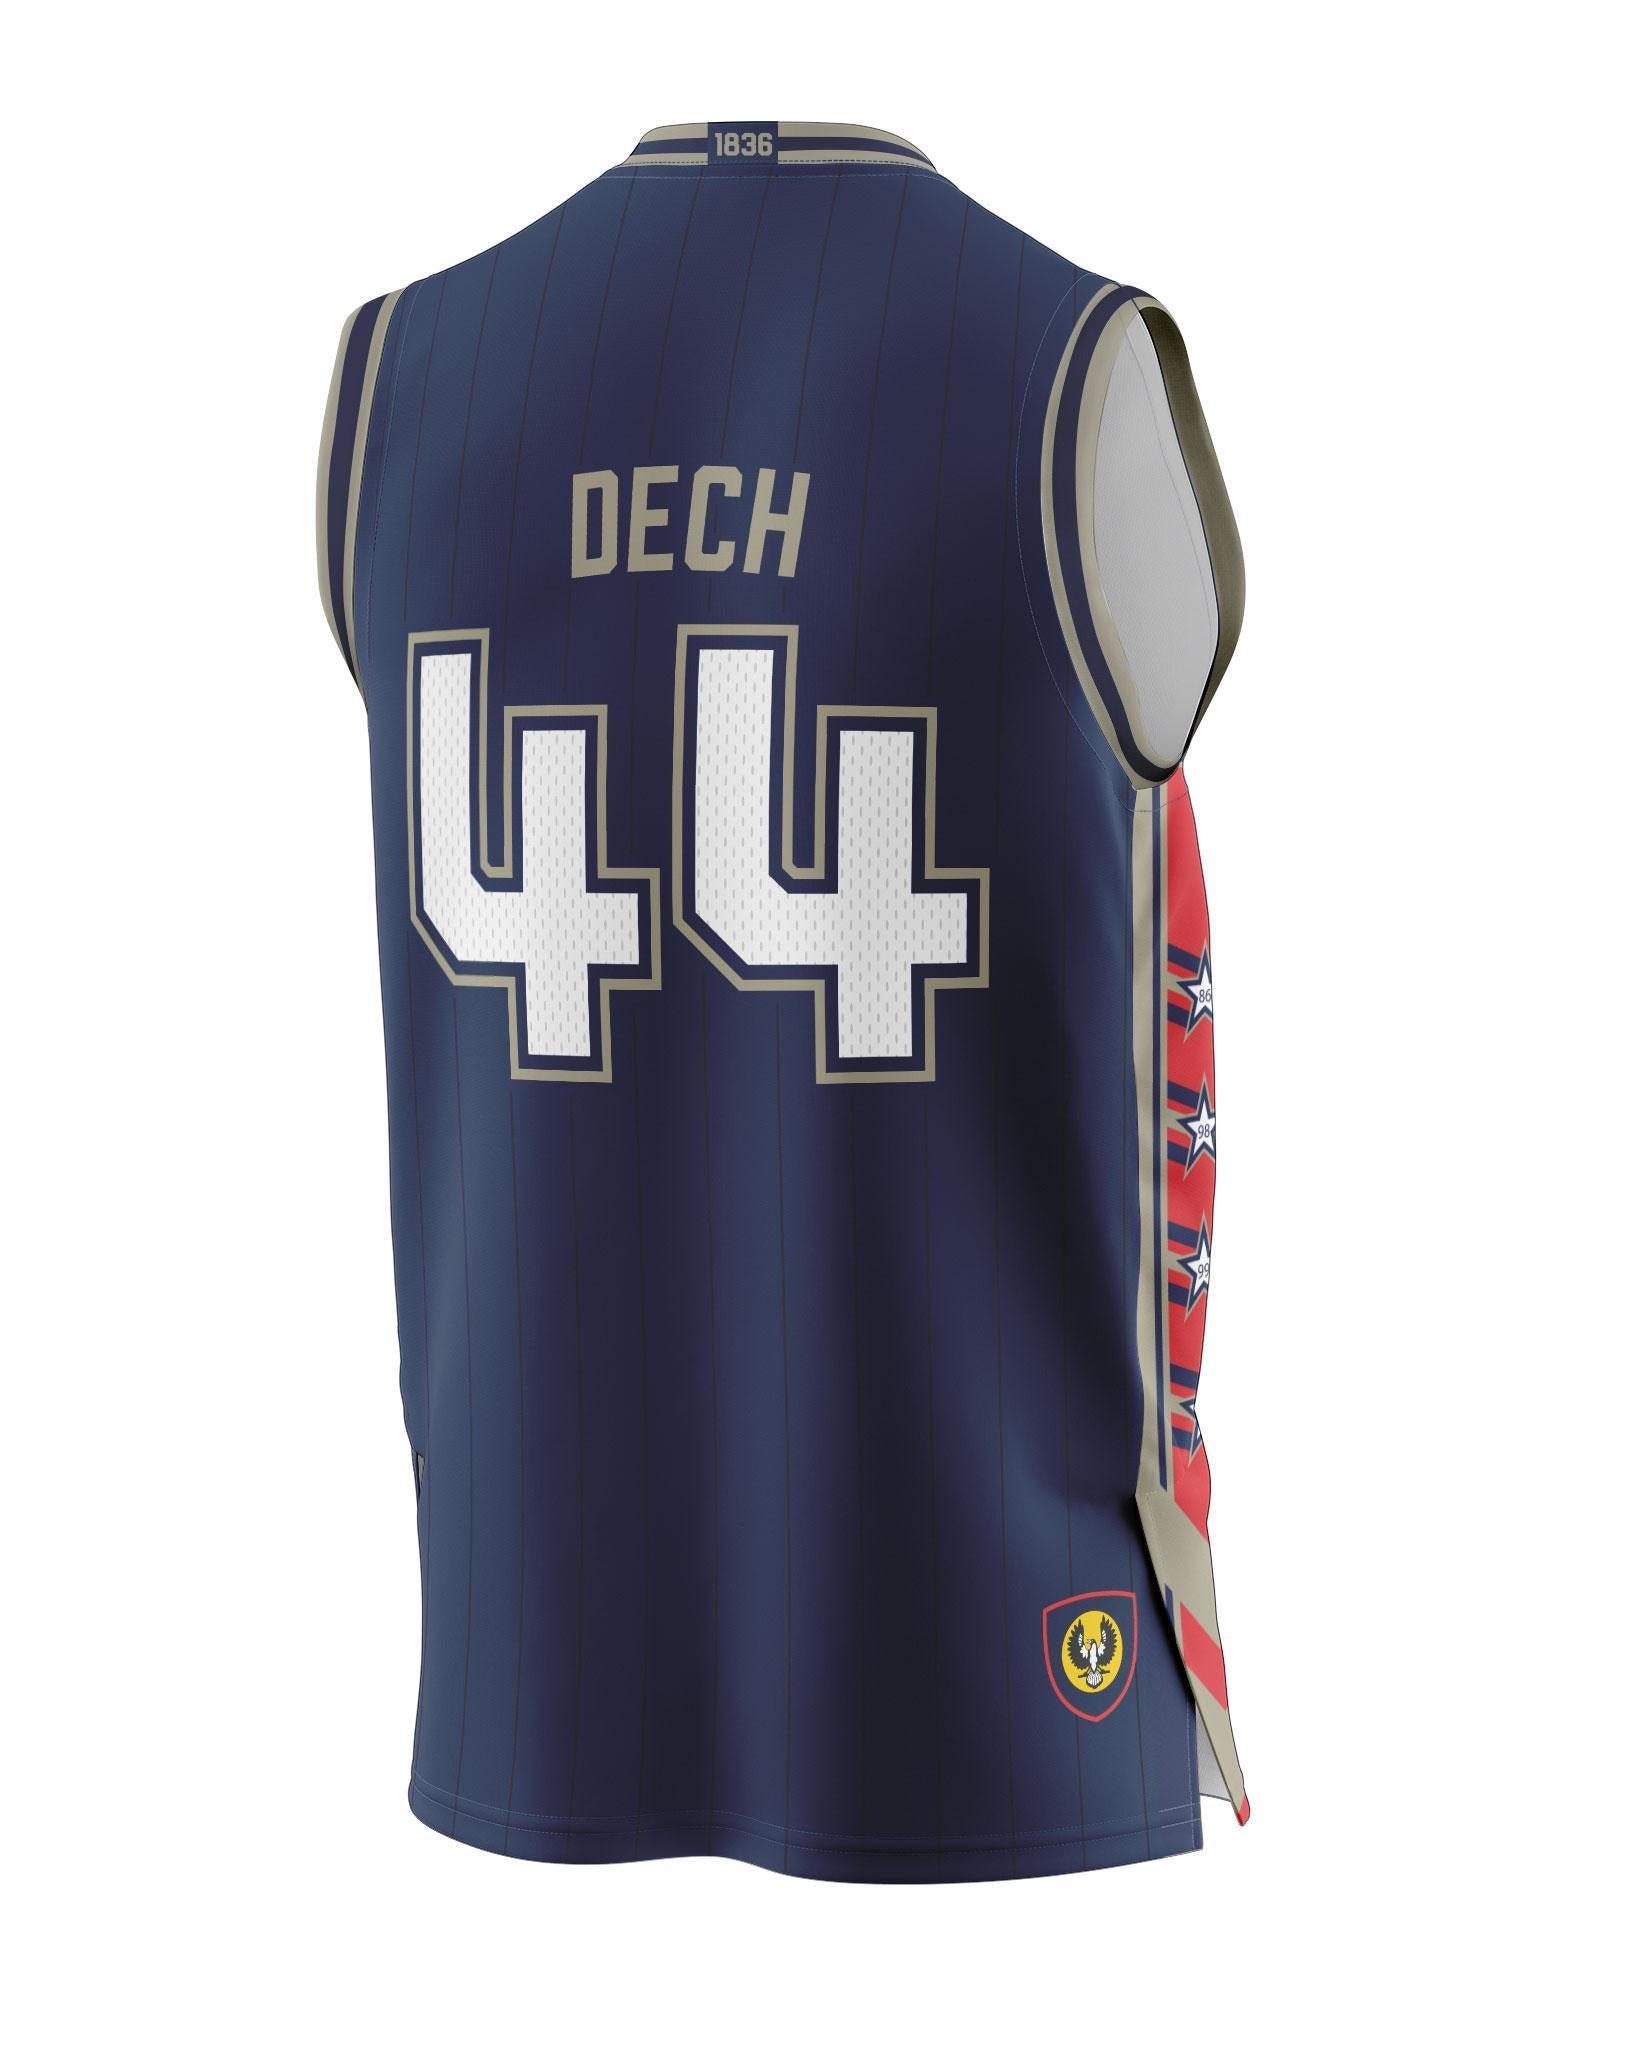 Adelaide 36ers 2021/22 Authentic Home Youth Jersey - Sunday Dech - Adelaide 36ers